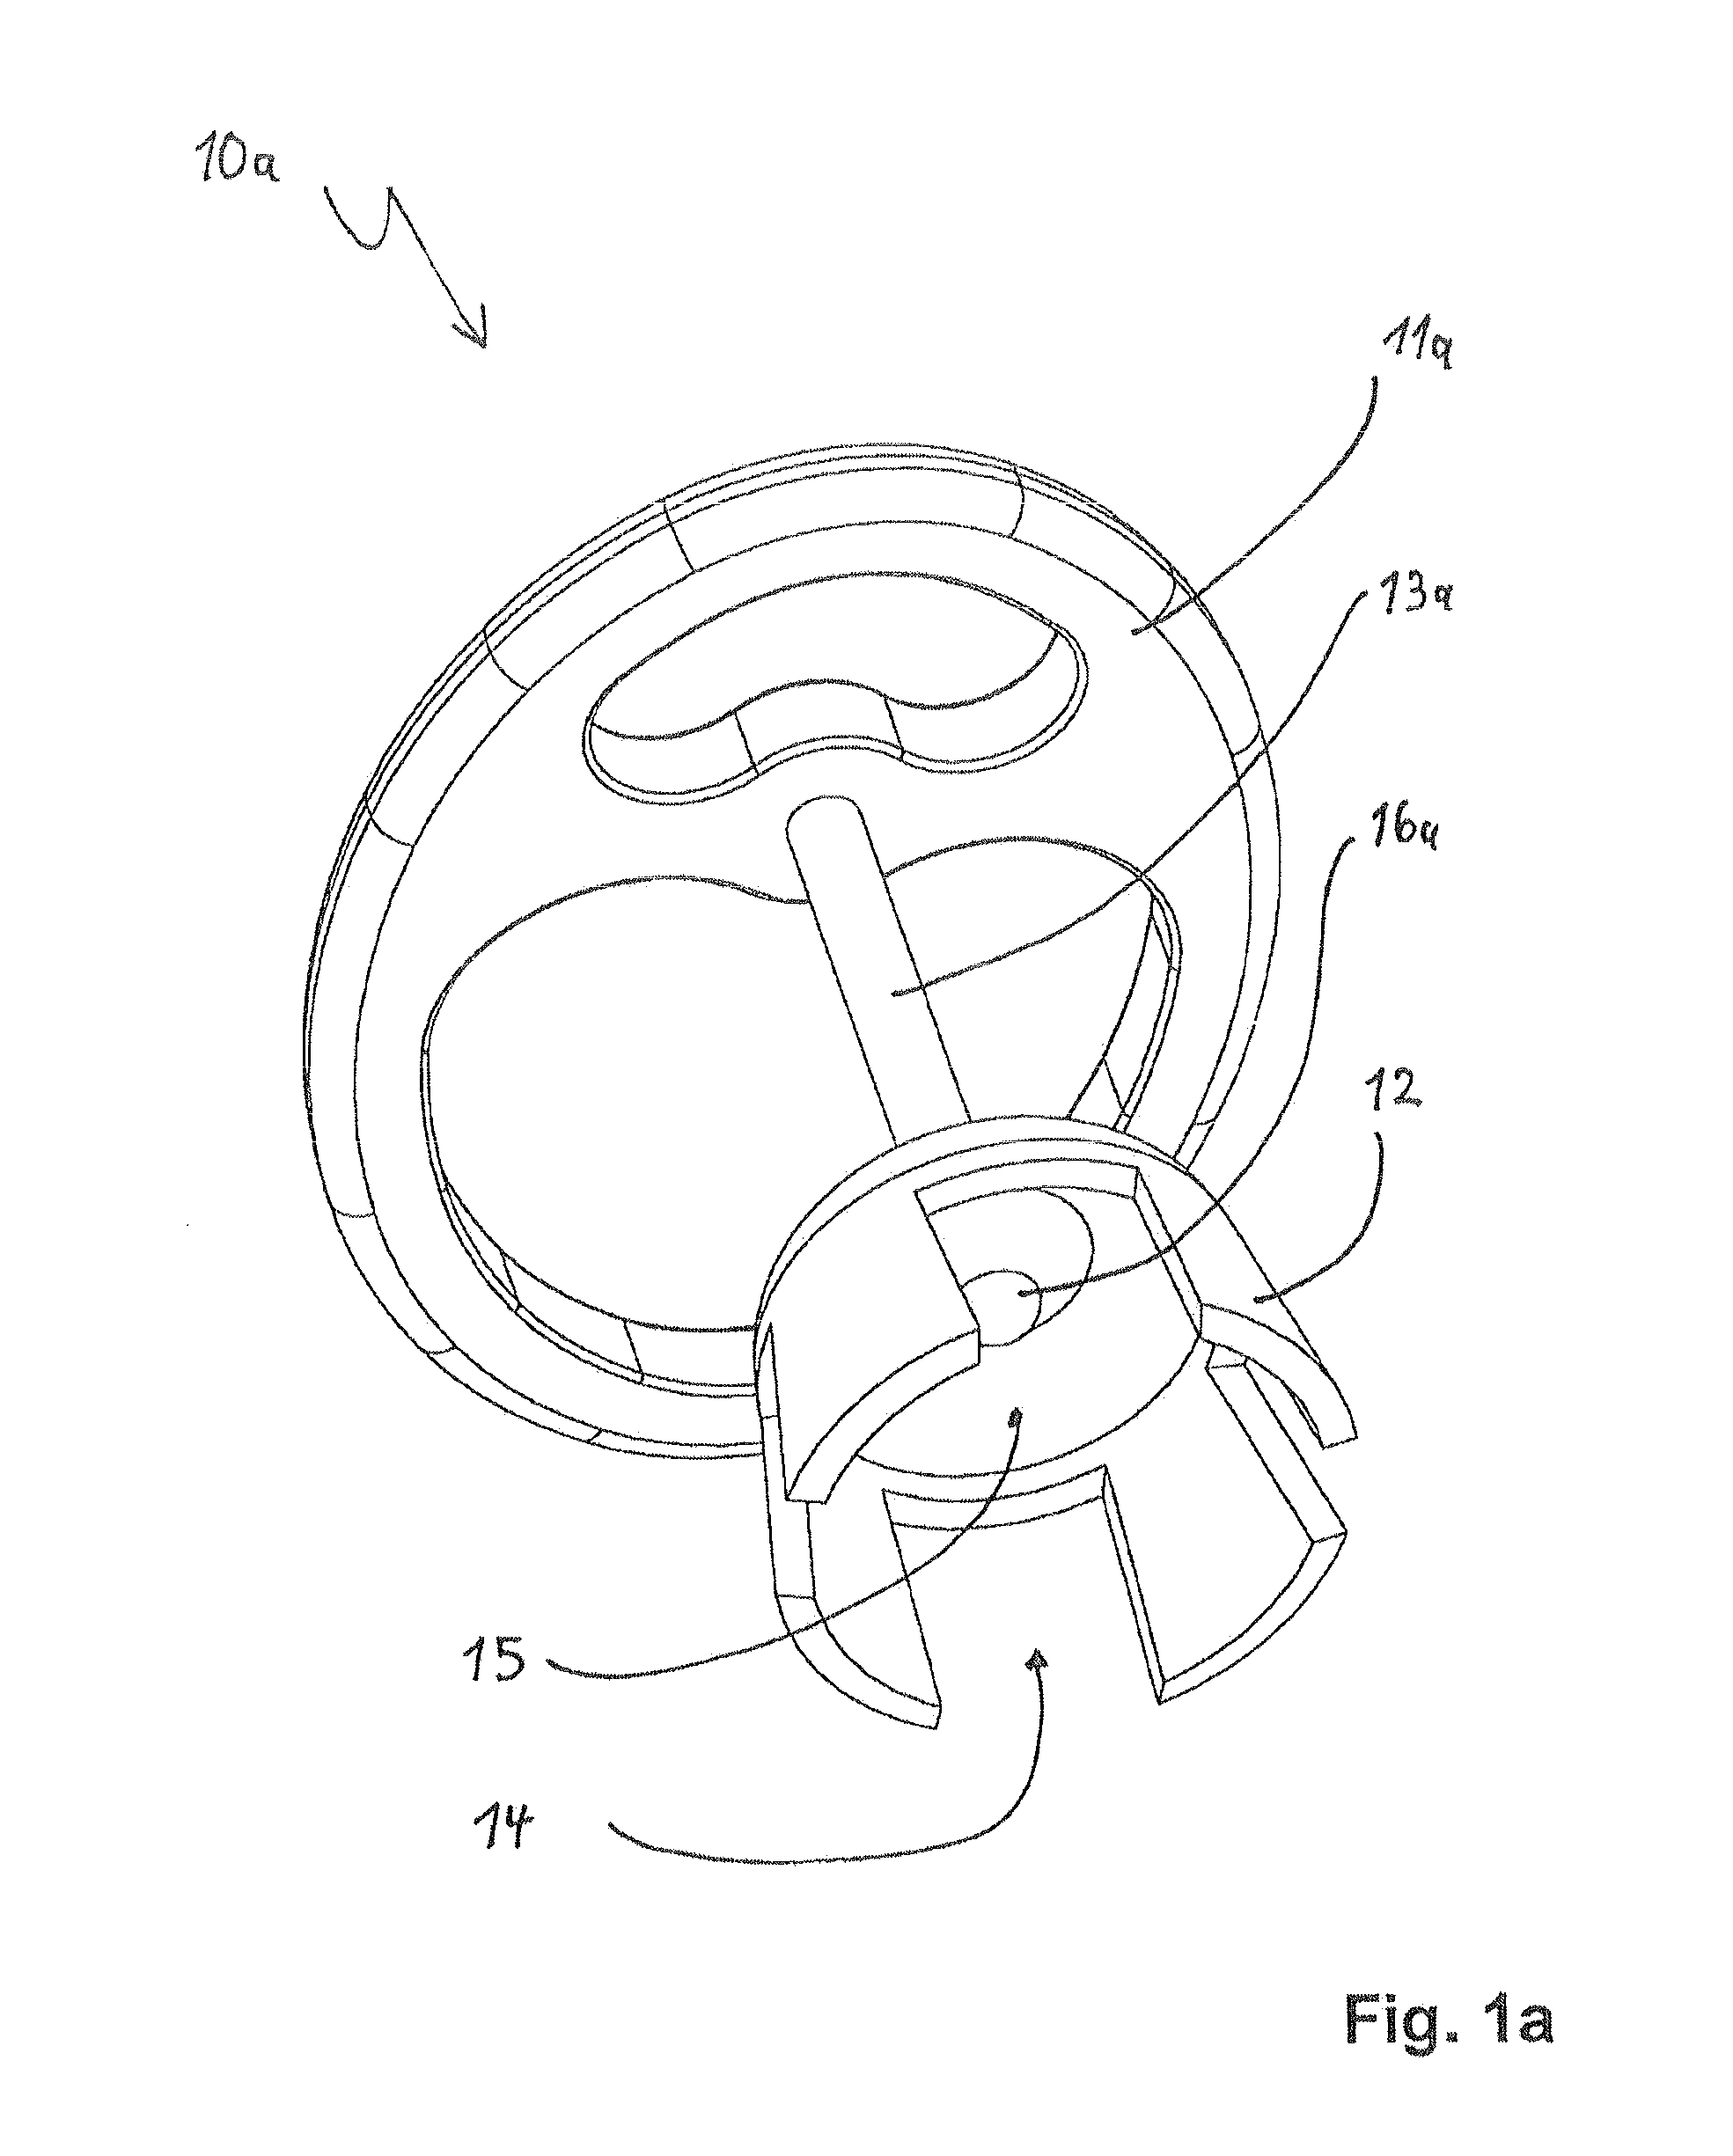 Ossicle prosthesis comprising a built-up attaching element